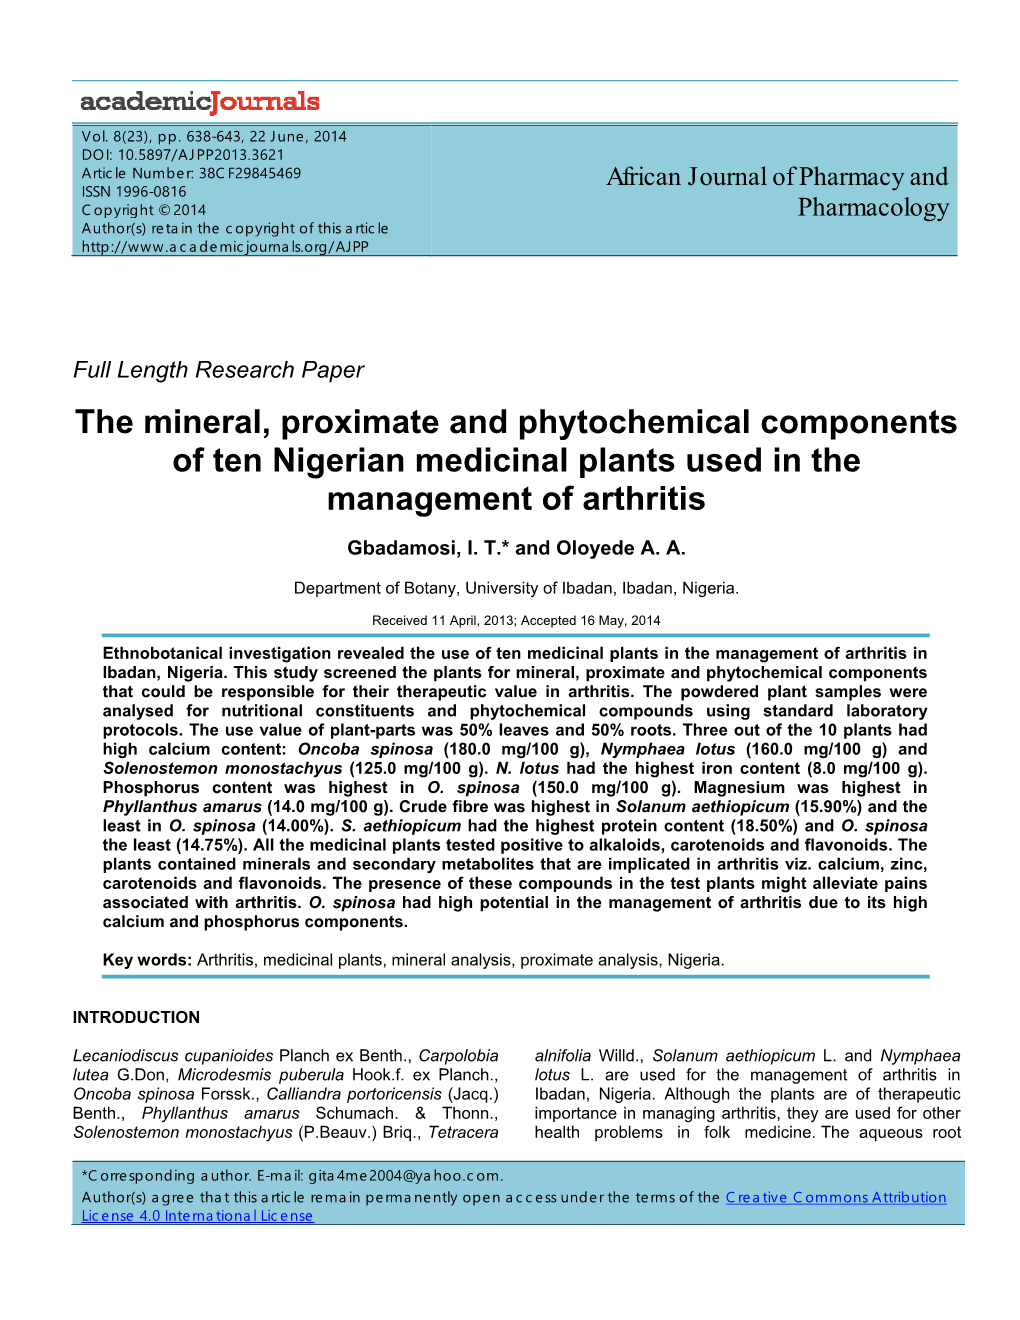 The Mineral, Proximate and Phytochemical Components of Ten Nigerian Medicinal Plants Used in the Management of Arthritis